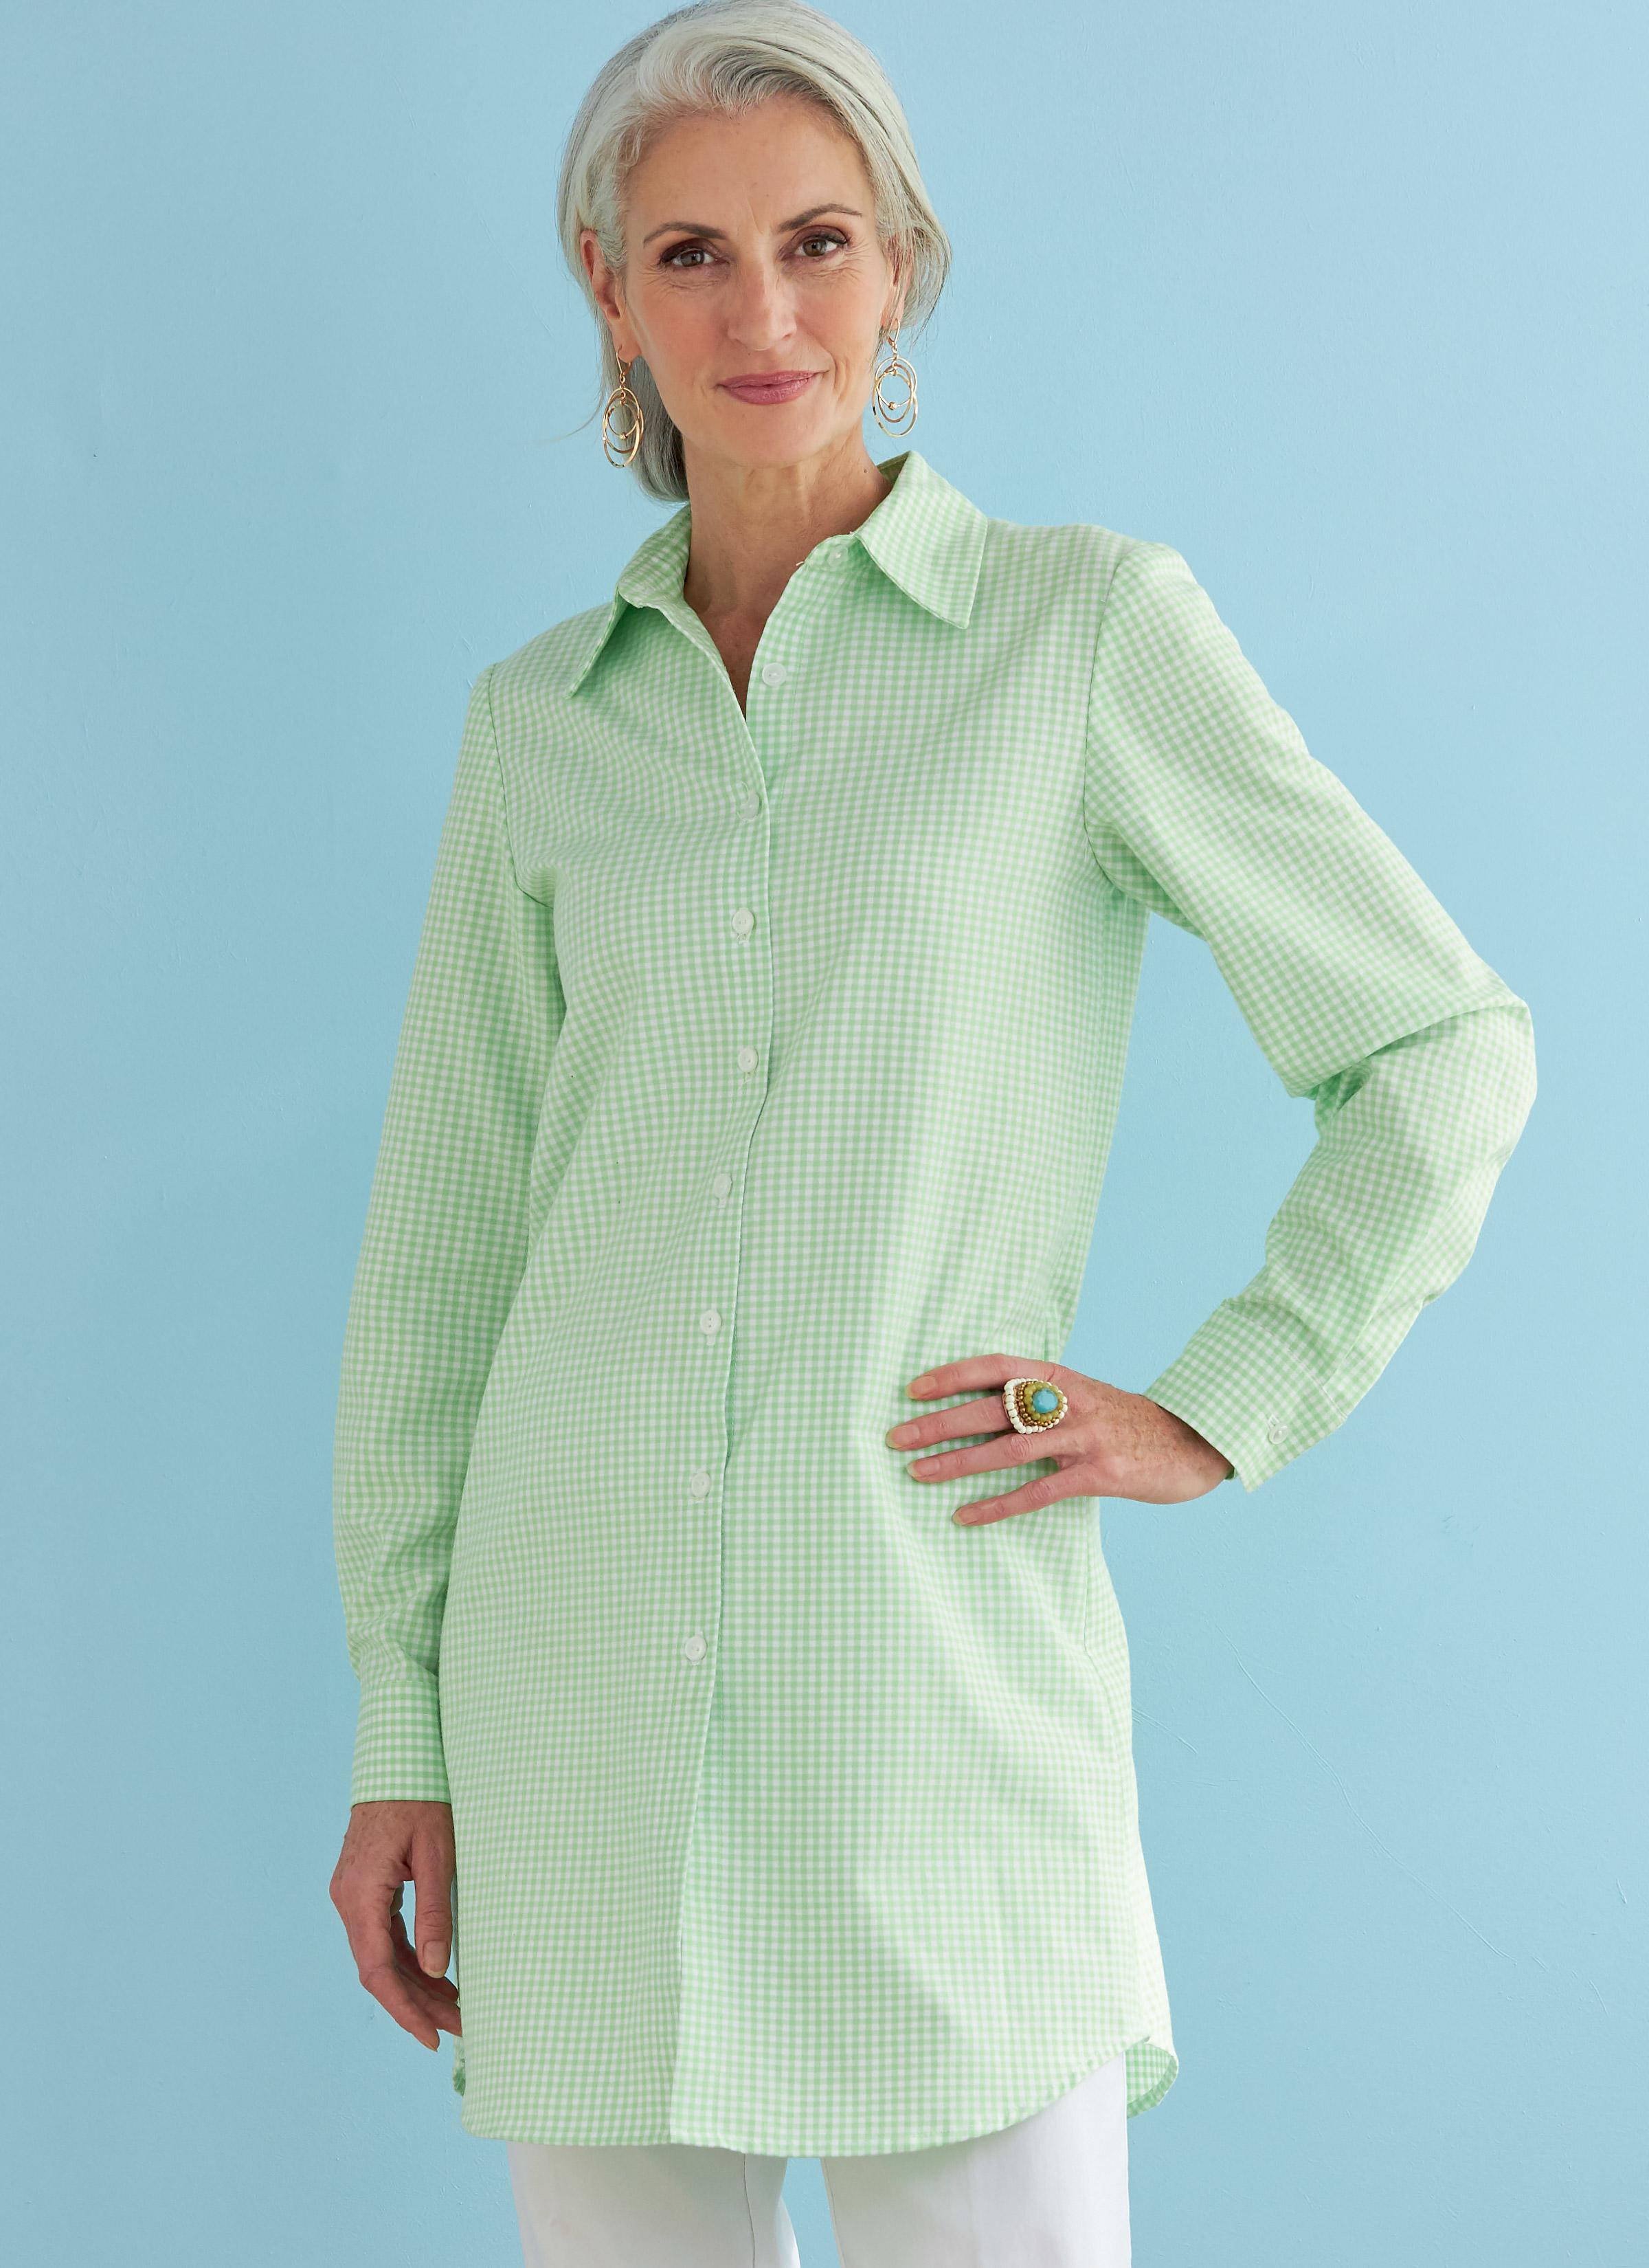 Butterick B6747 Misses' Button-Down Collared Shirts